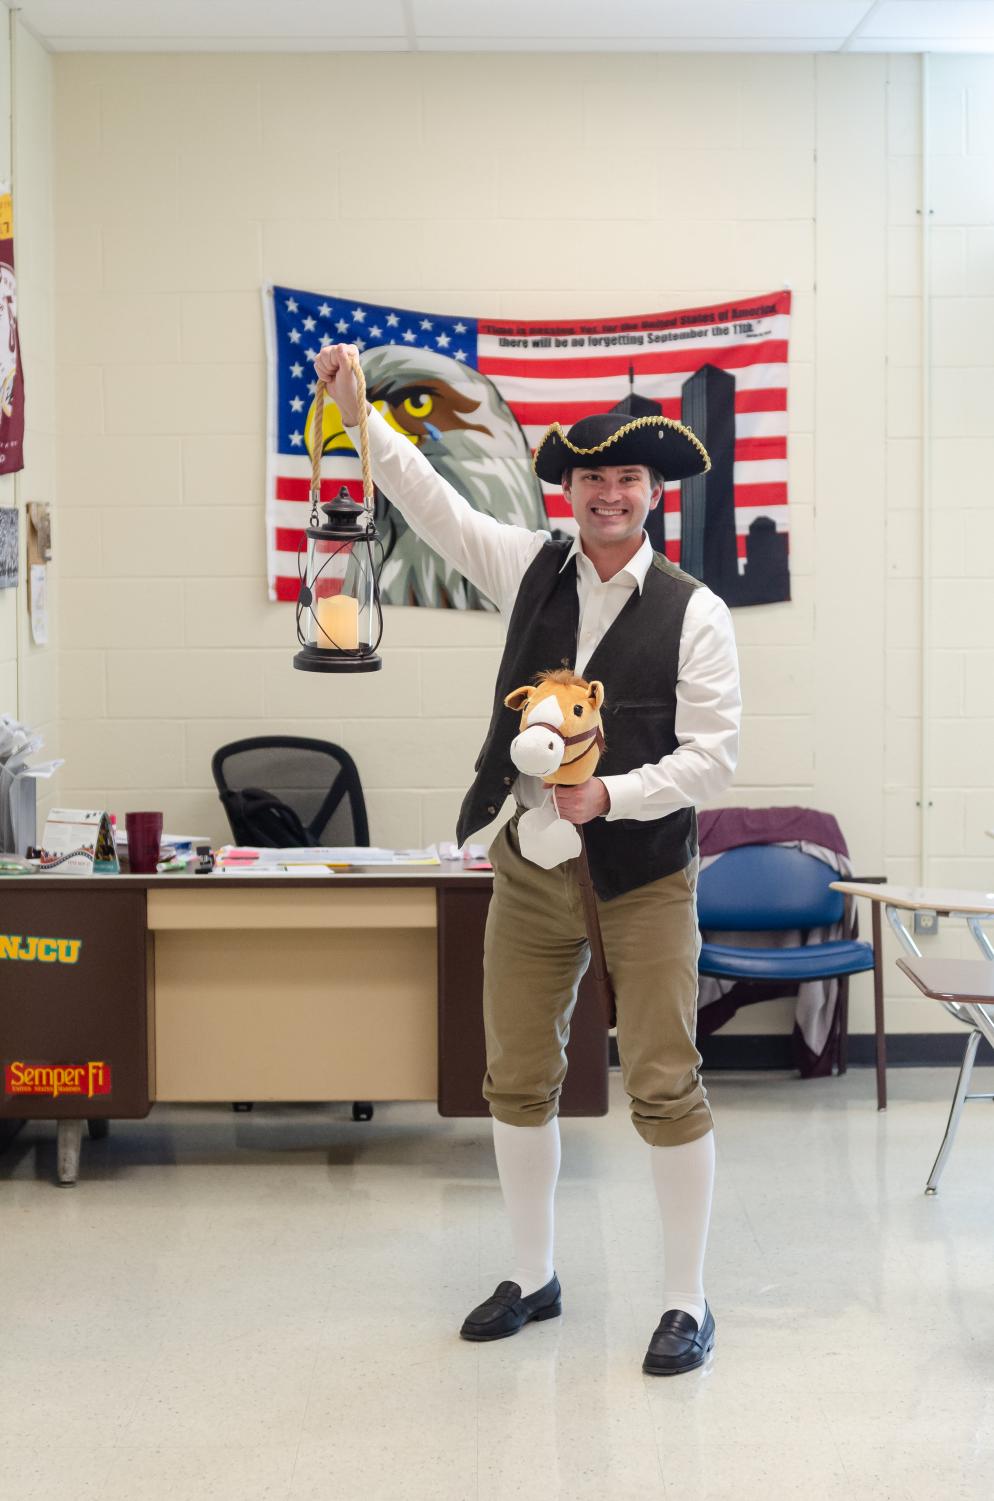 Being a history teacher, it was only right for Mr. Dorsey to dress up as Paul Revere!